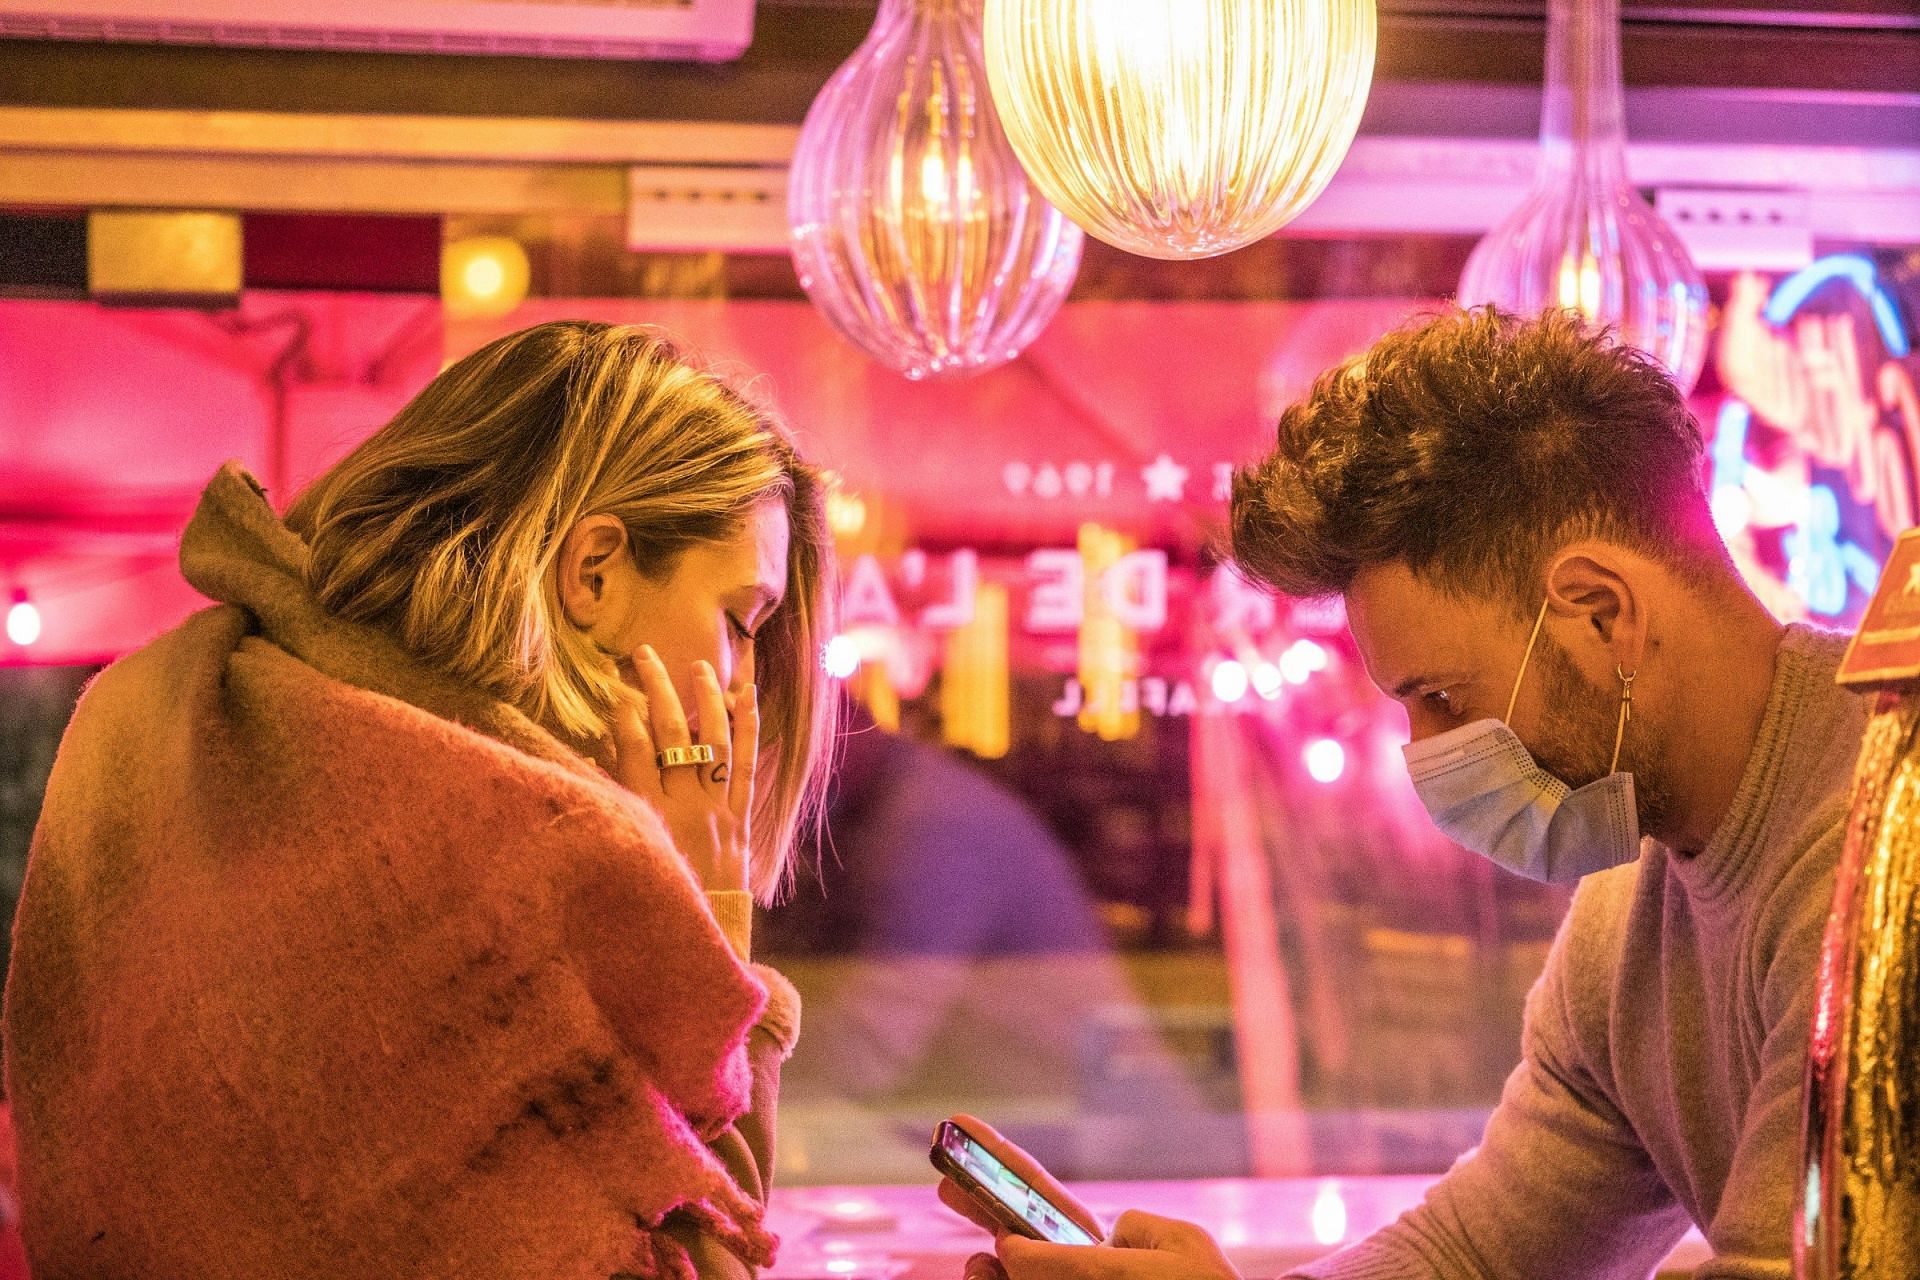 Talk to your partner instead of being on your phone (Image by Miquel Parera/Unsplash)